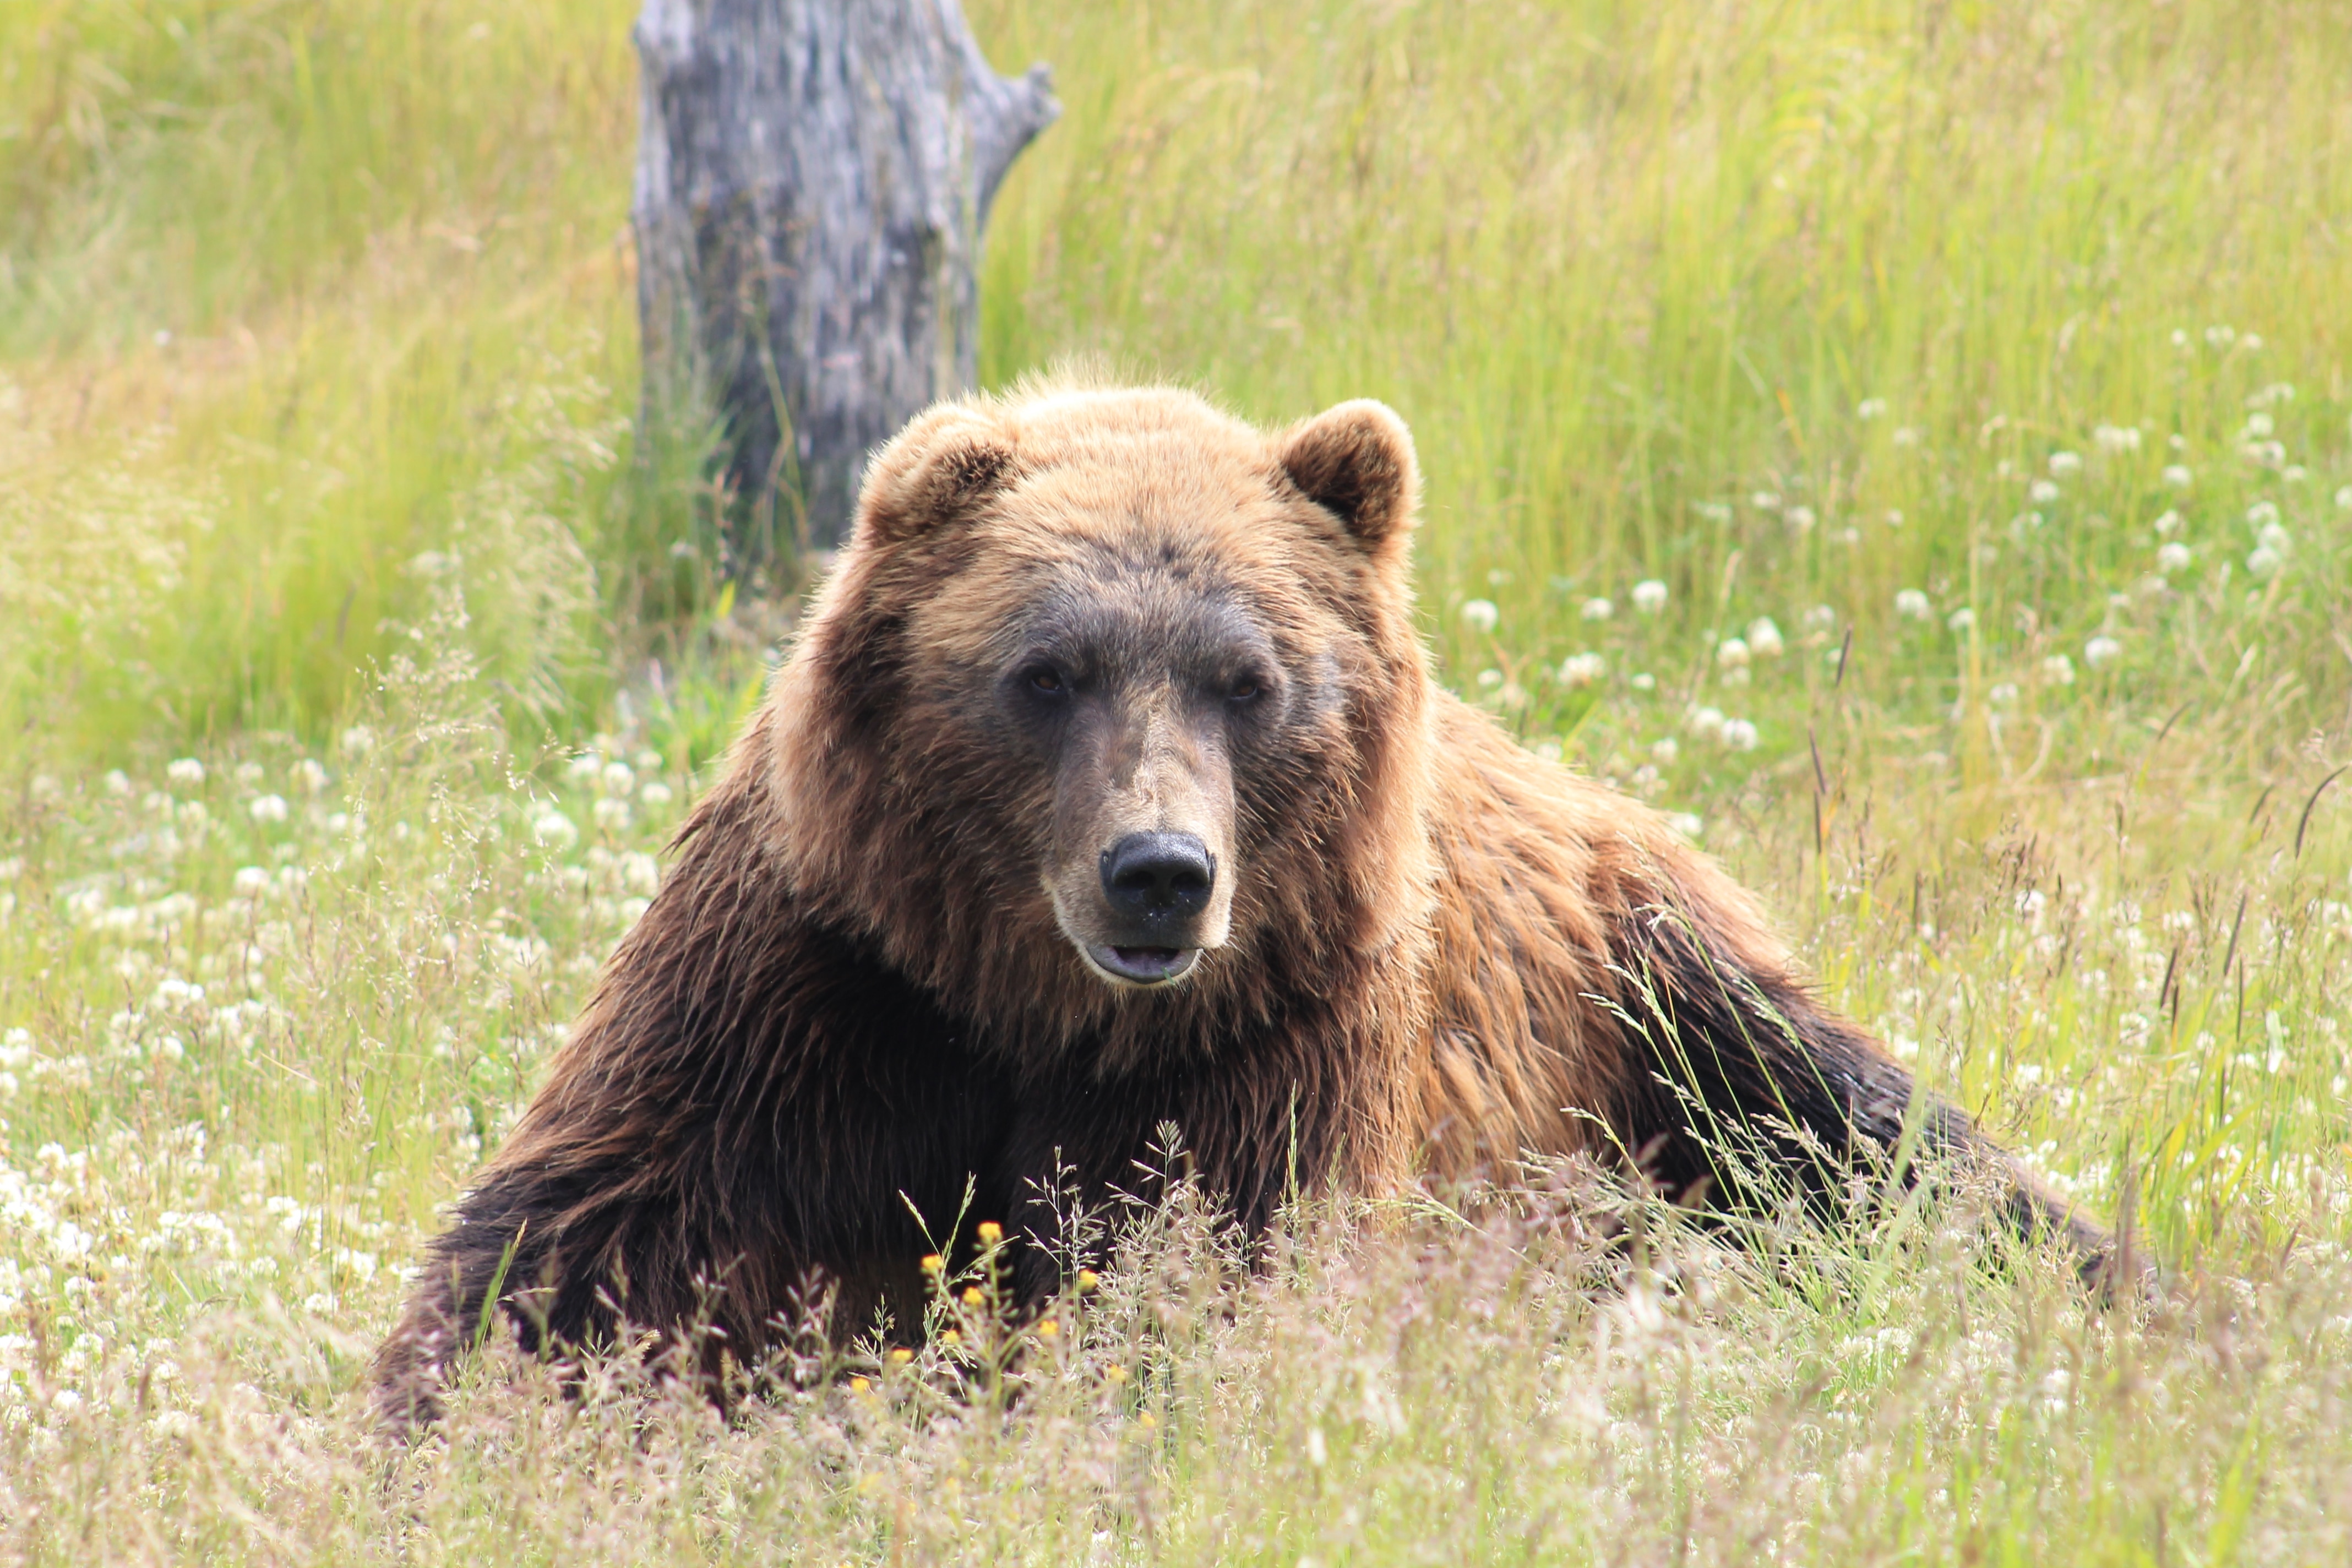 grizzly bear on green grassy field near gray tree during daytime